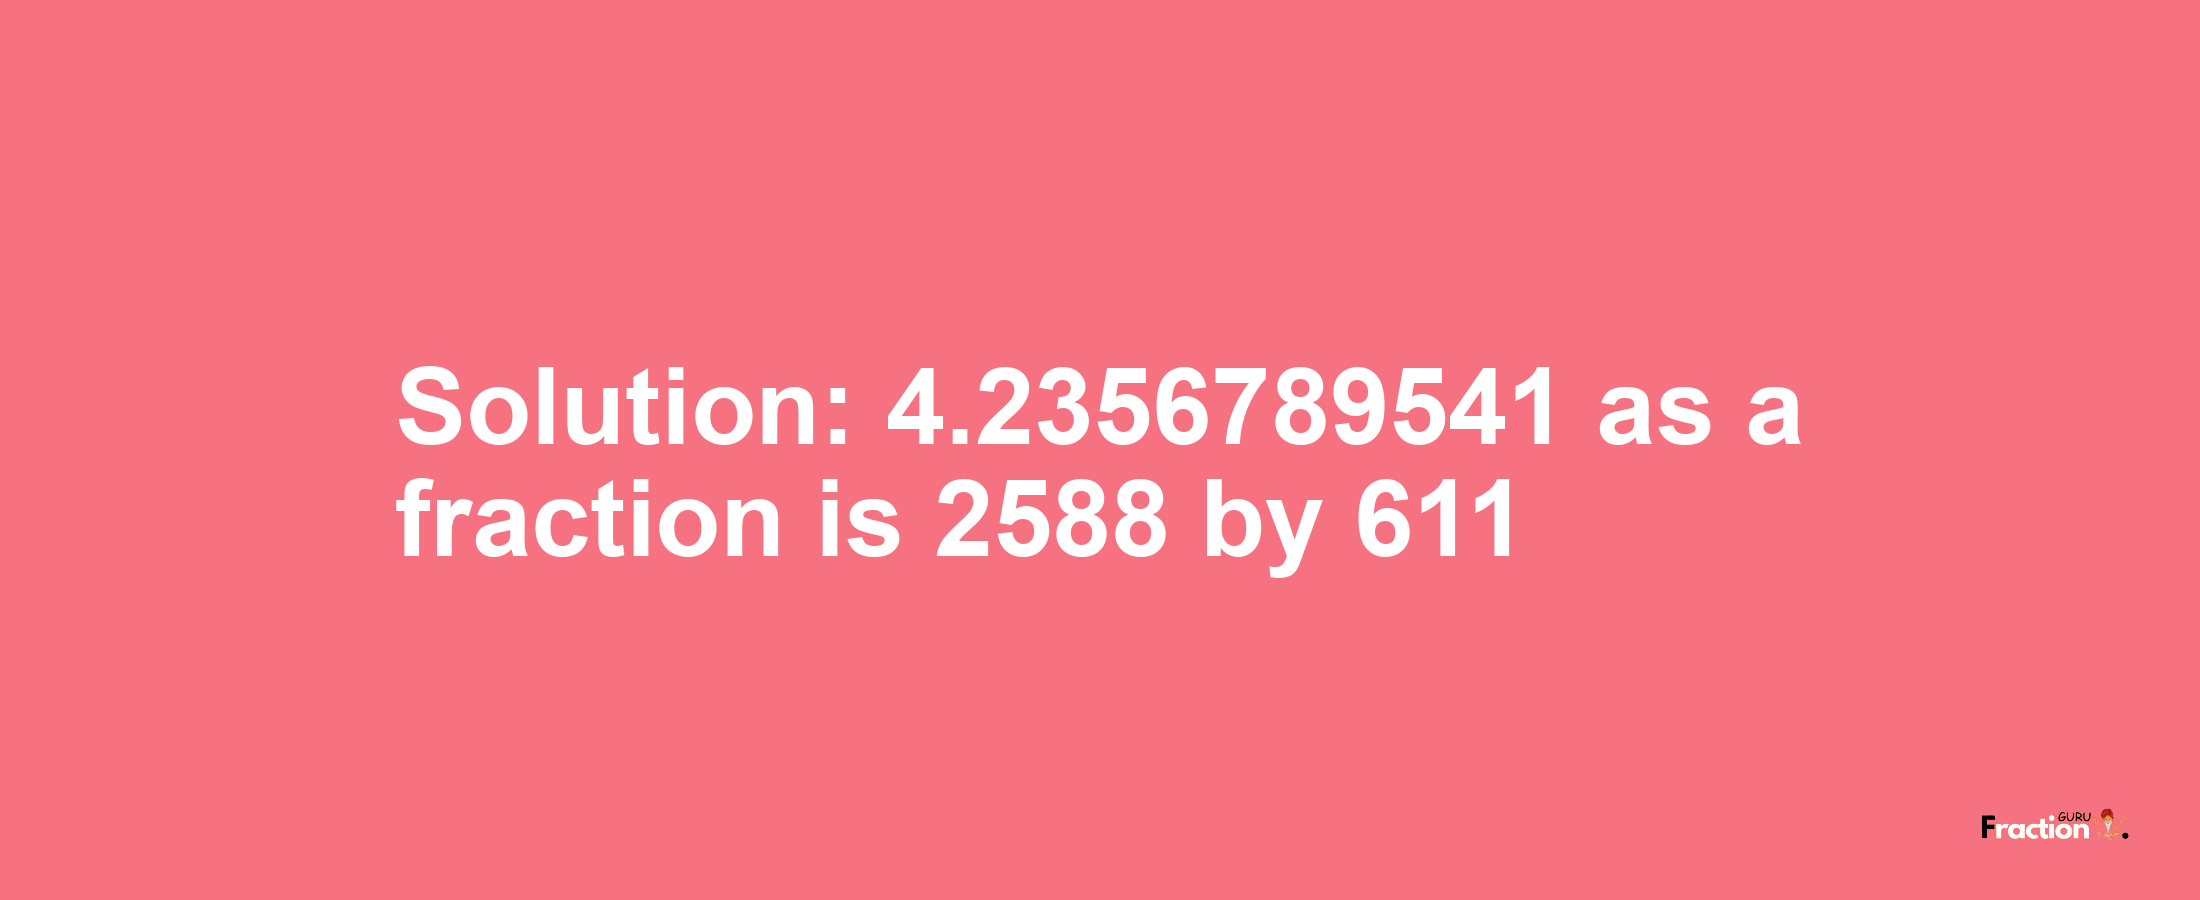 Solution:4.2356789541 as a fraction is 2588/611